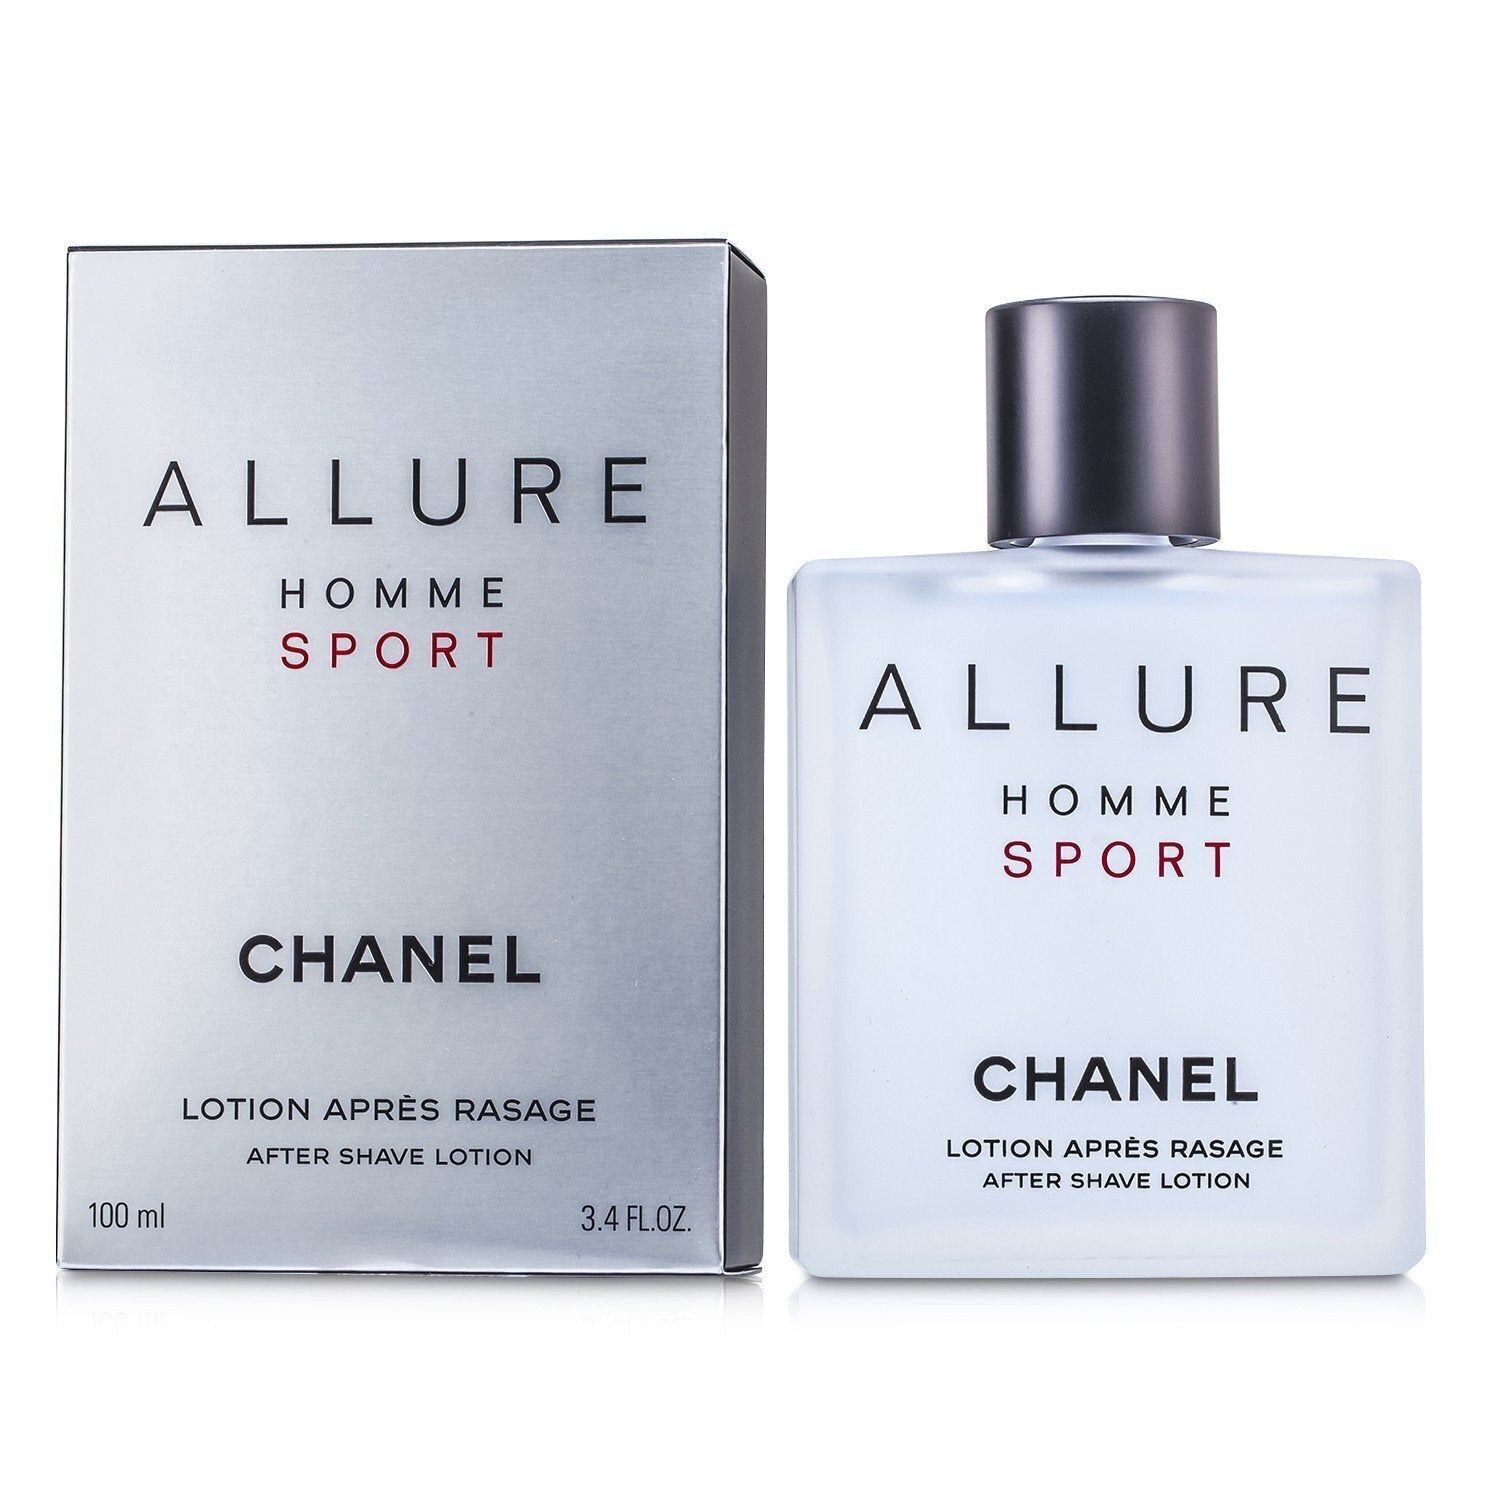 ALLURE HOMME SPORT After Shave Lotion by CHANEL